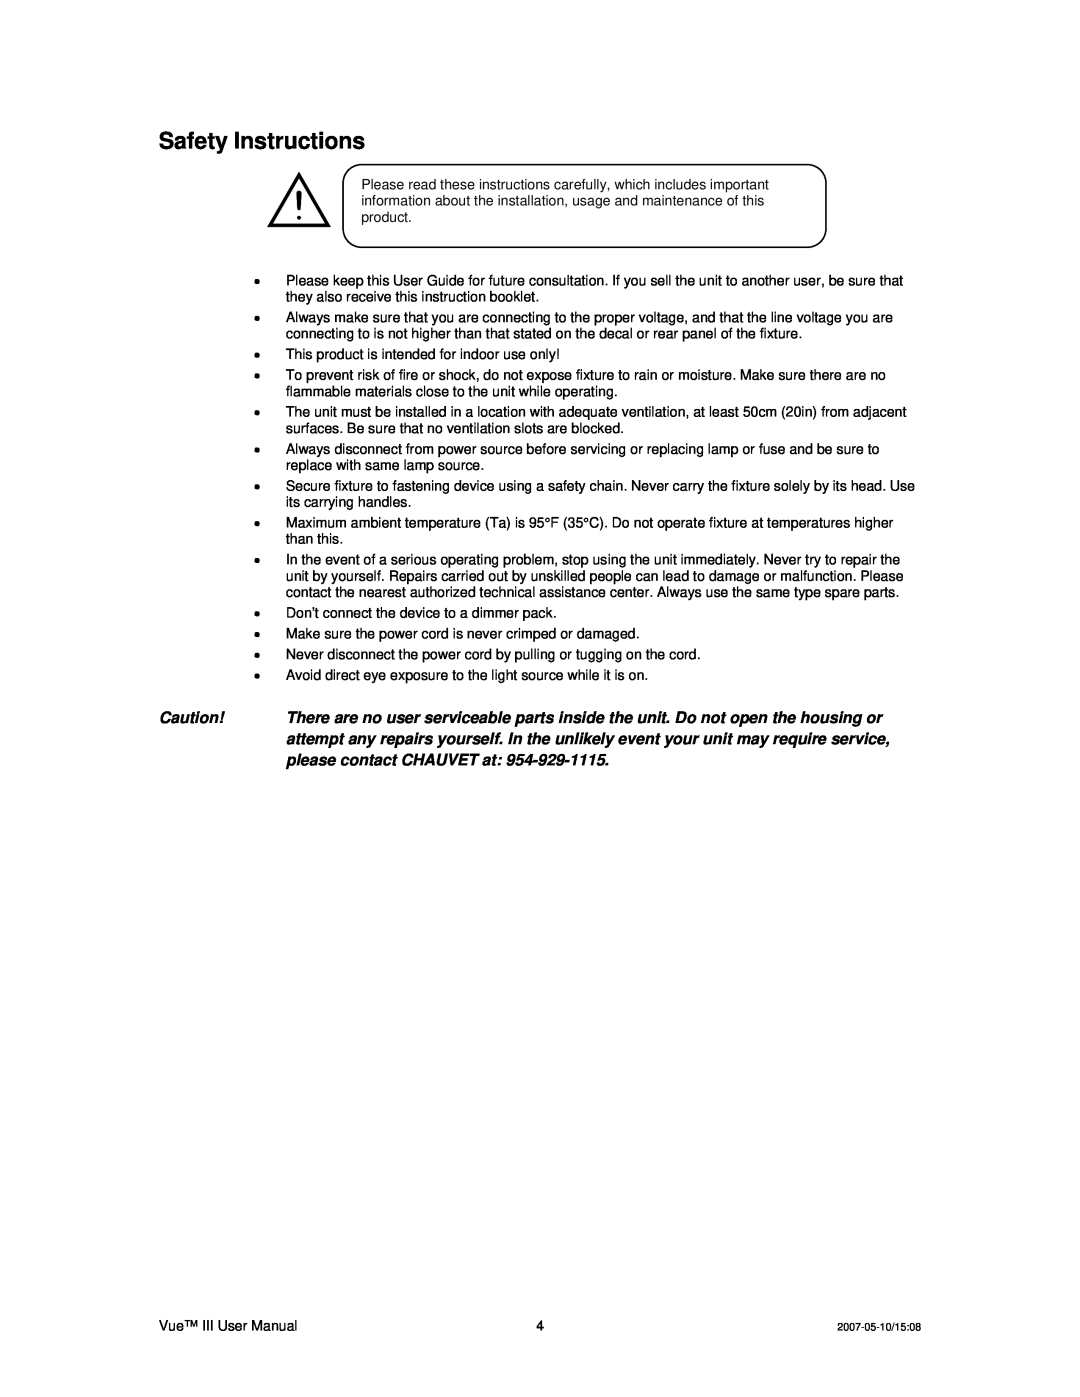 Chauvet Vue III user service Safety Instructions 